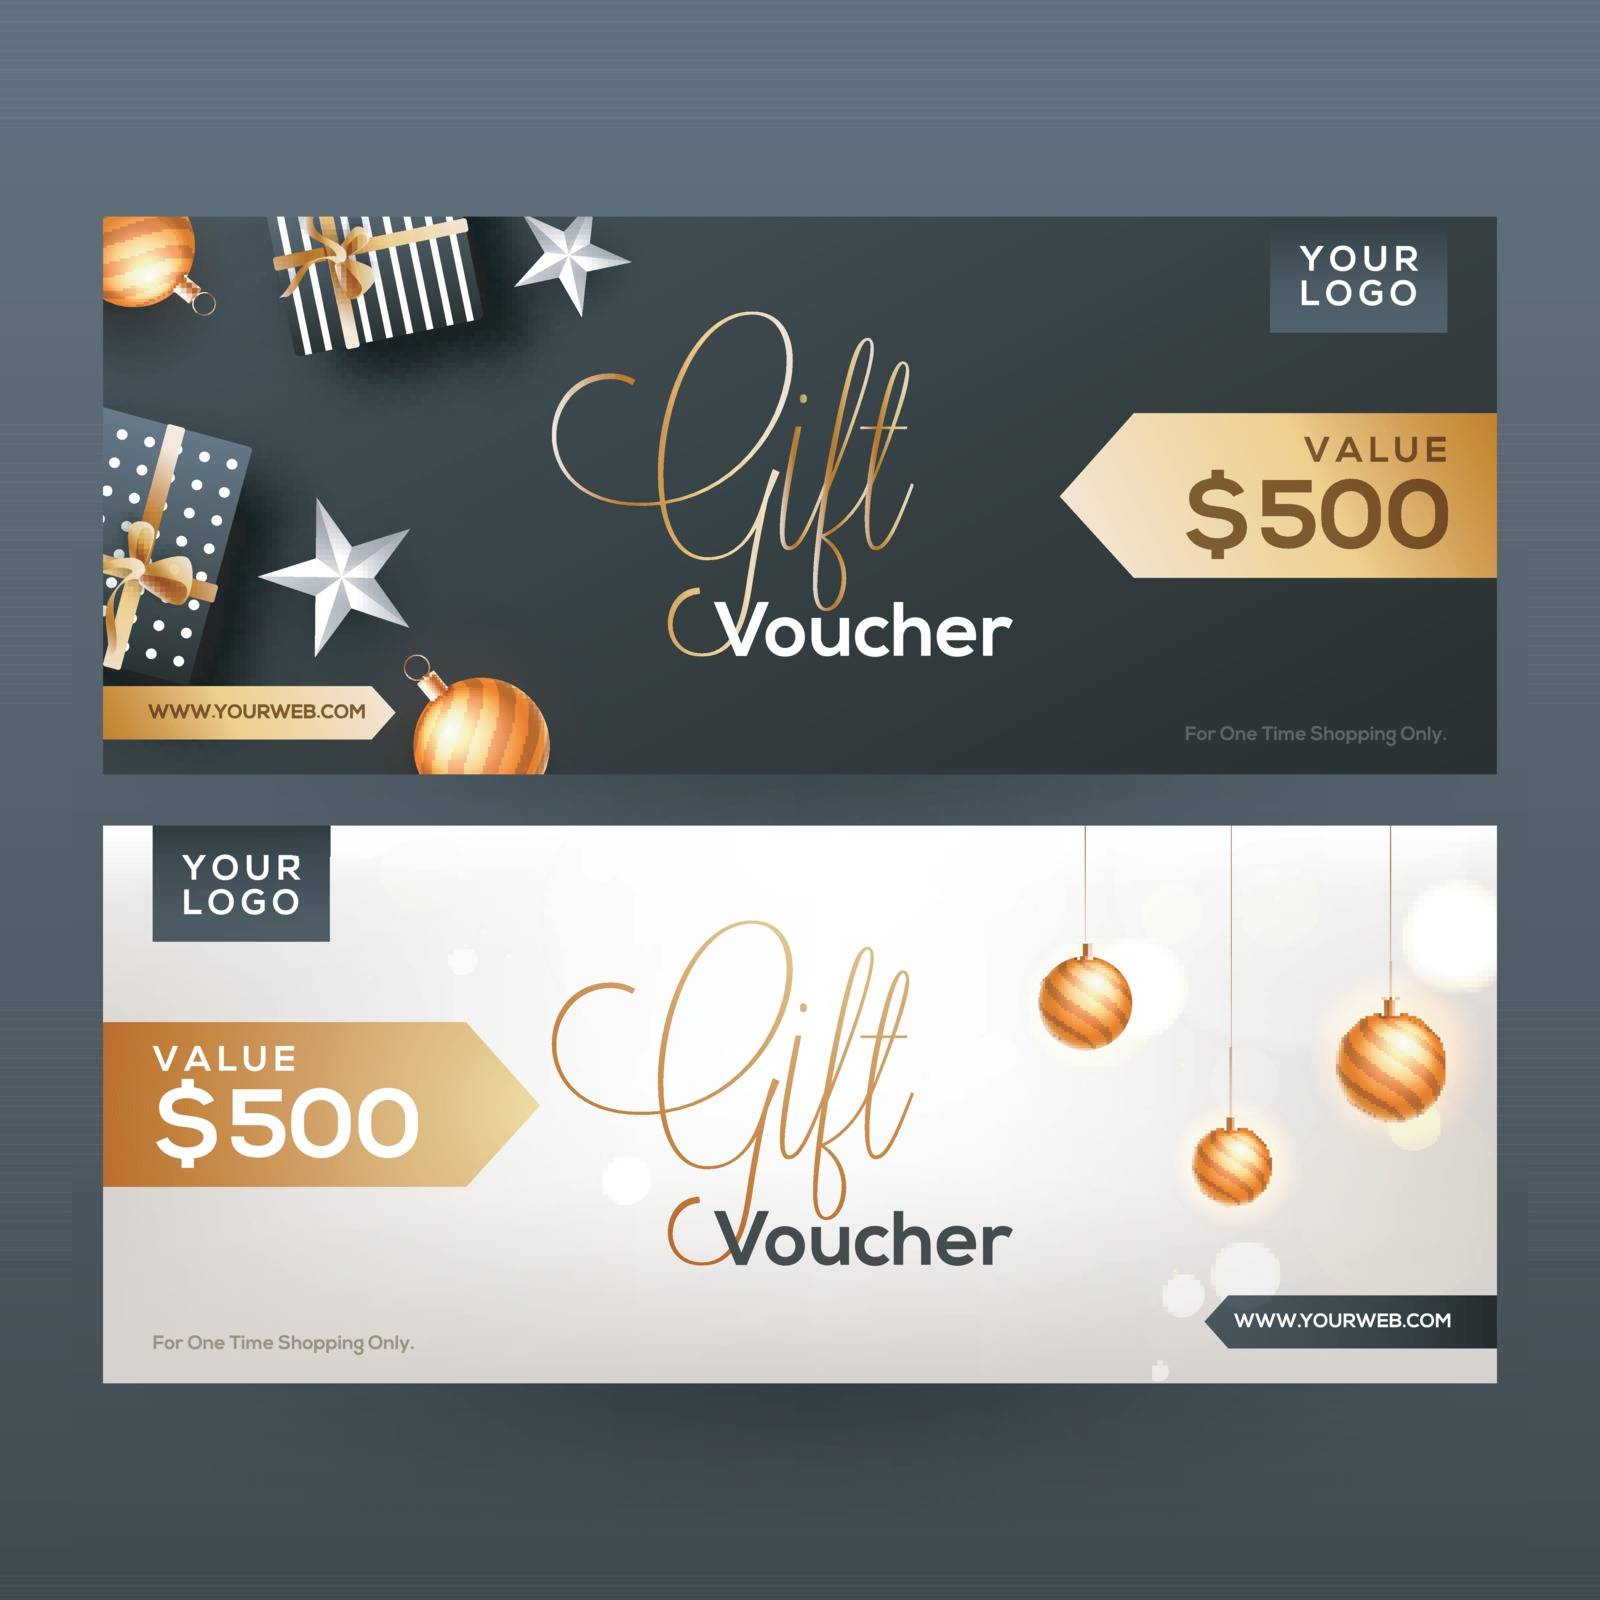 Elegant gift voucher or coupon layout with best discount offers and decorative gift boxes and baubles.